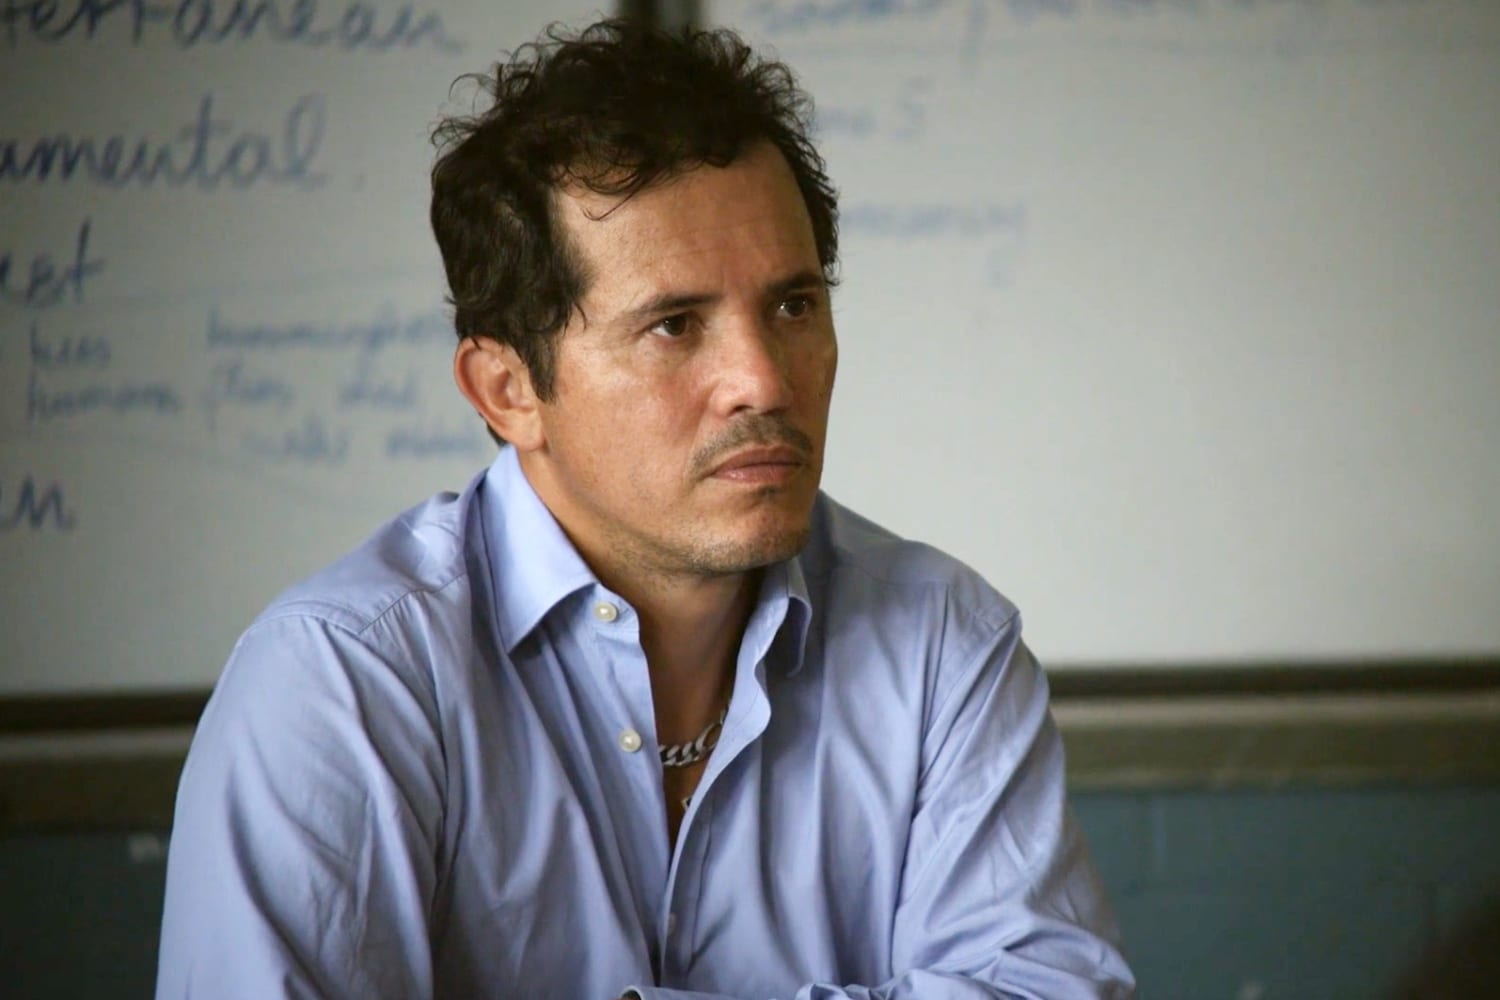 ‘John Leguizamo Live at Rikers’ brings comedy, inspiration to ‘invisible’ young inmates